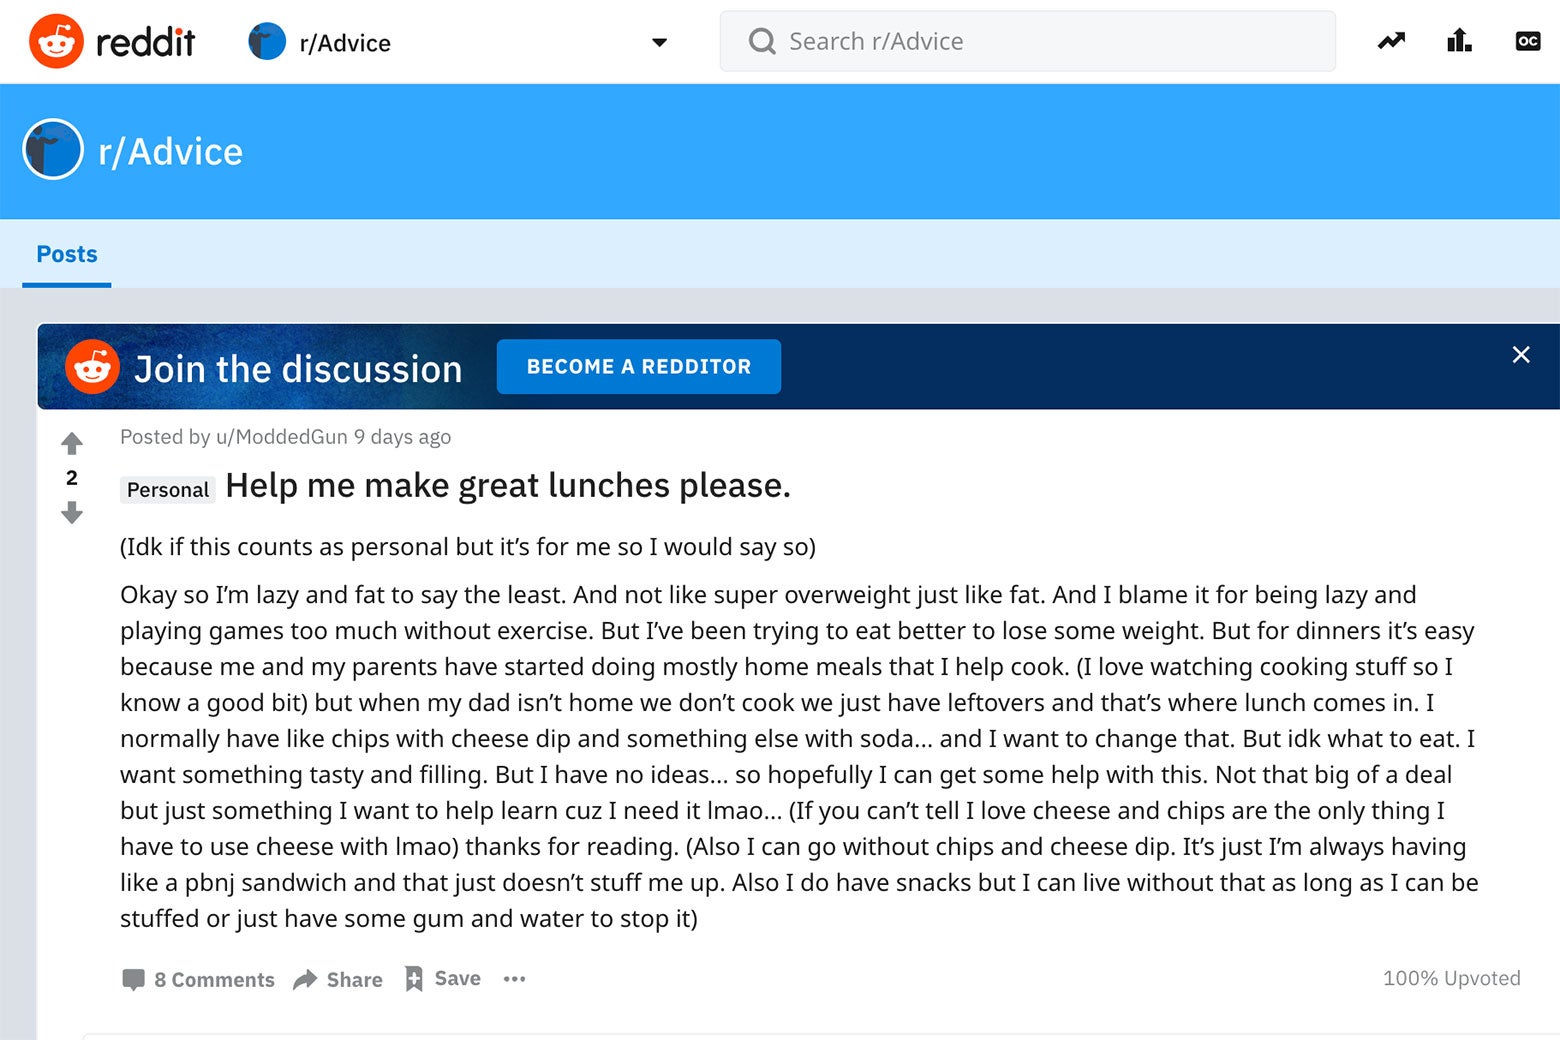 Screengrab of a Reddit thread where a person asks for help making great lunches.